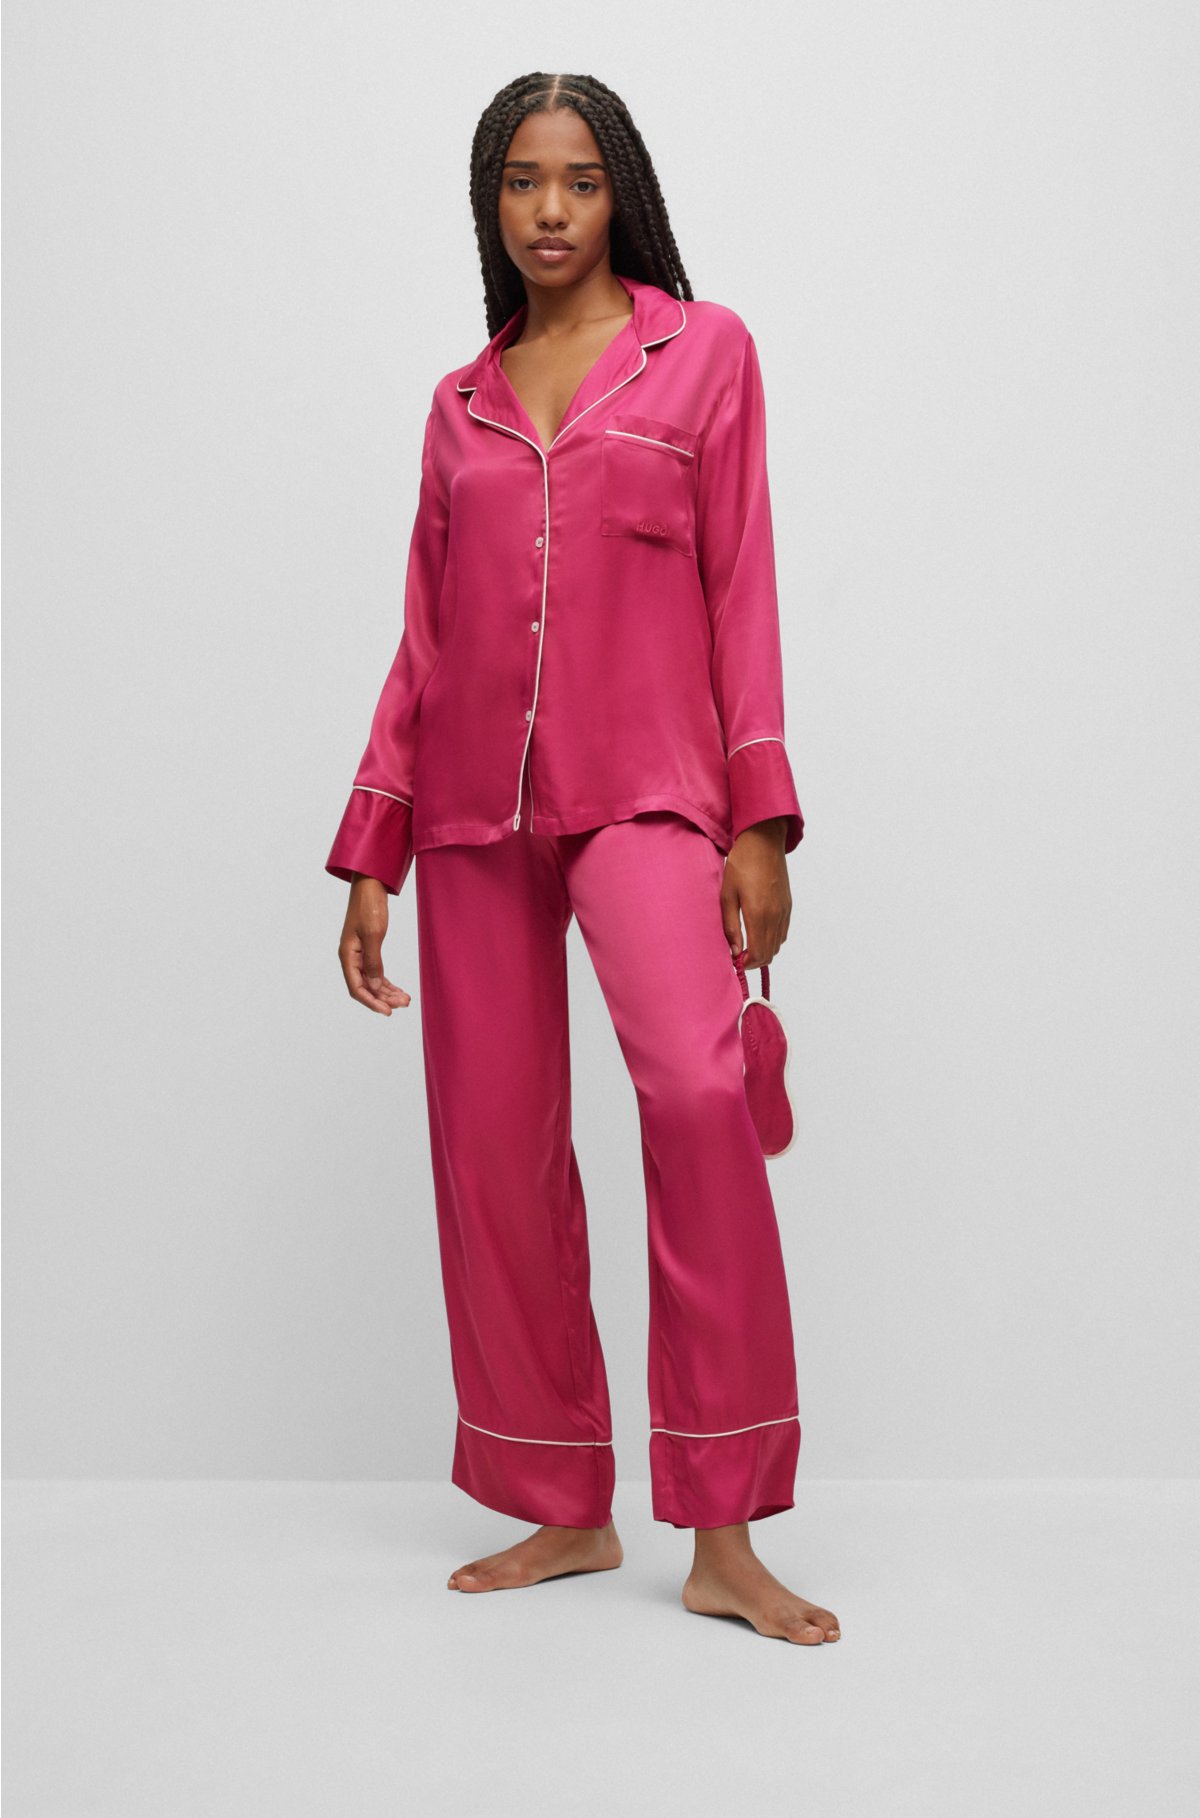 HUGO - Relaxed-fit pajamas satin contrast piping with